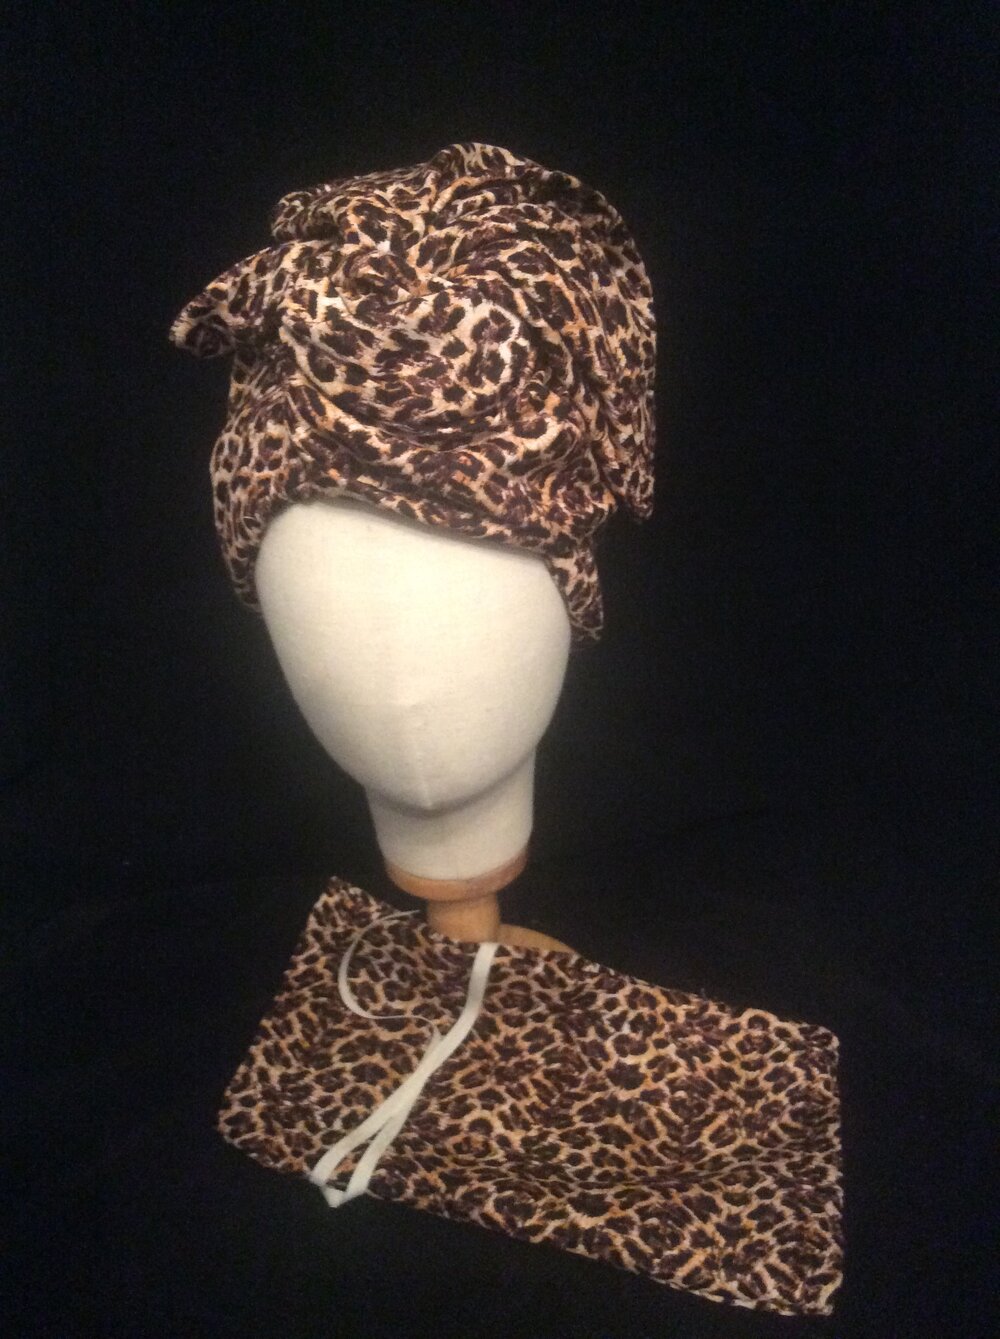 Leopard print: Black and brown classic